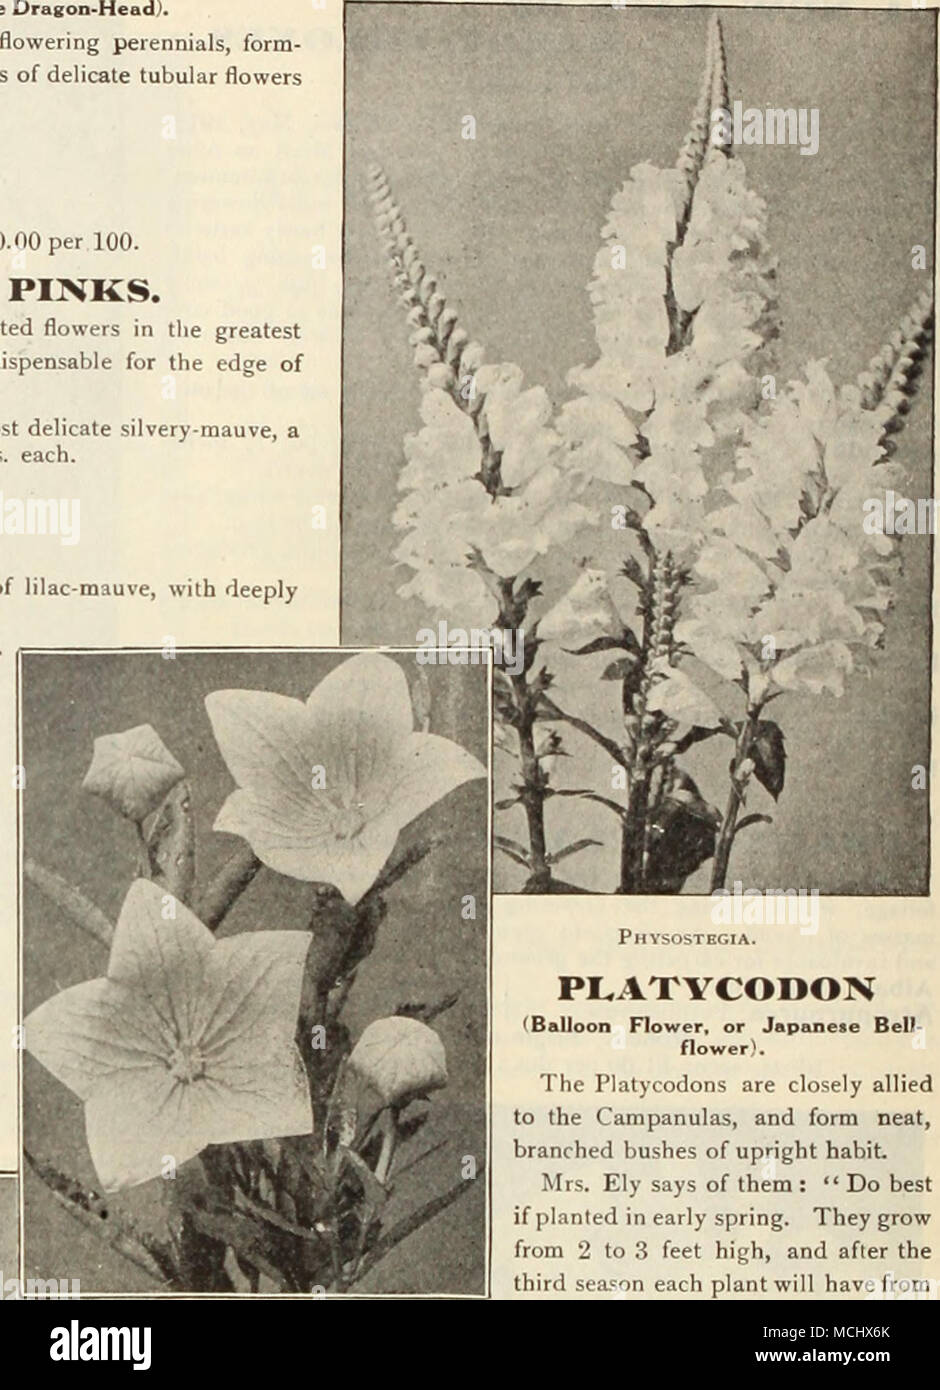 . Platvcodon. Hardy Garden Pinks. PI.ATYCODON (Balloon Flower, or Japanese Bell- The Platycodons are closely allied to the Campanulas, and form neat, branched bushes of upright habit. Mrs. Ely says of them : &quot; Do best if planted in early spring. They grow from 2 to 3 feet high, and after the third season each plant will have from ten to twelve stalks covered with the lovely blue or white blossoms for nearly a month, beginning about July 10th. They are also free from attacks of insects, and if planted in good soil, and well cov- ered in late autumn with a litter of leaves or stable manure, Stock Photo